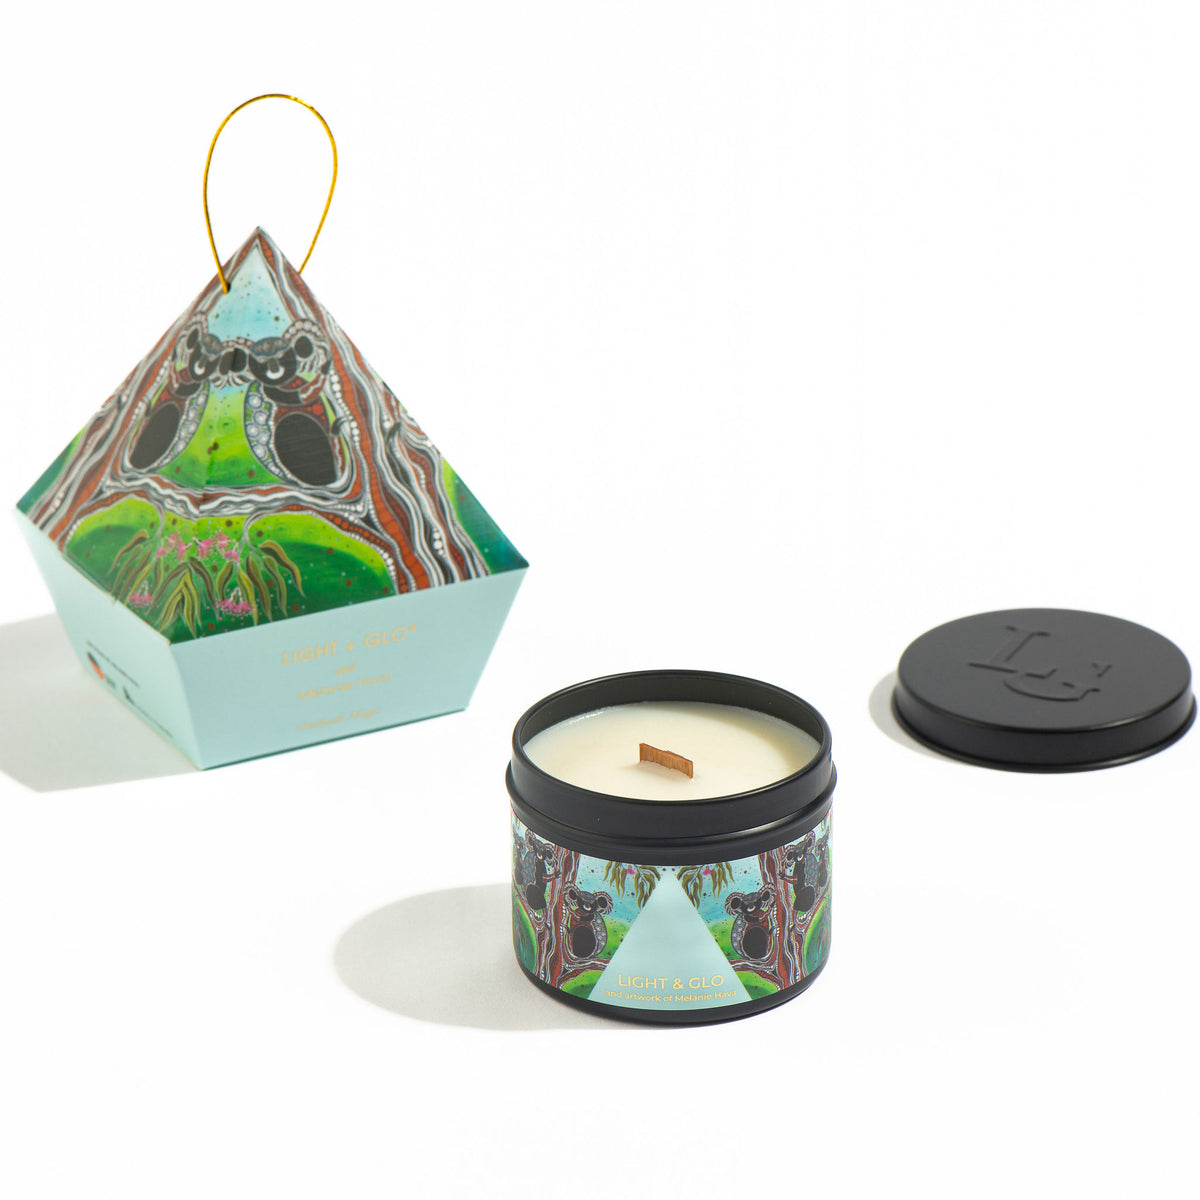 Soul Australiana Travel Candle - Outback Magic Bauble Limited Edition Candle | Luxury Candles &amp; Home Fragrances by Light + Glo